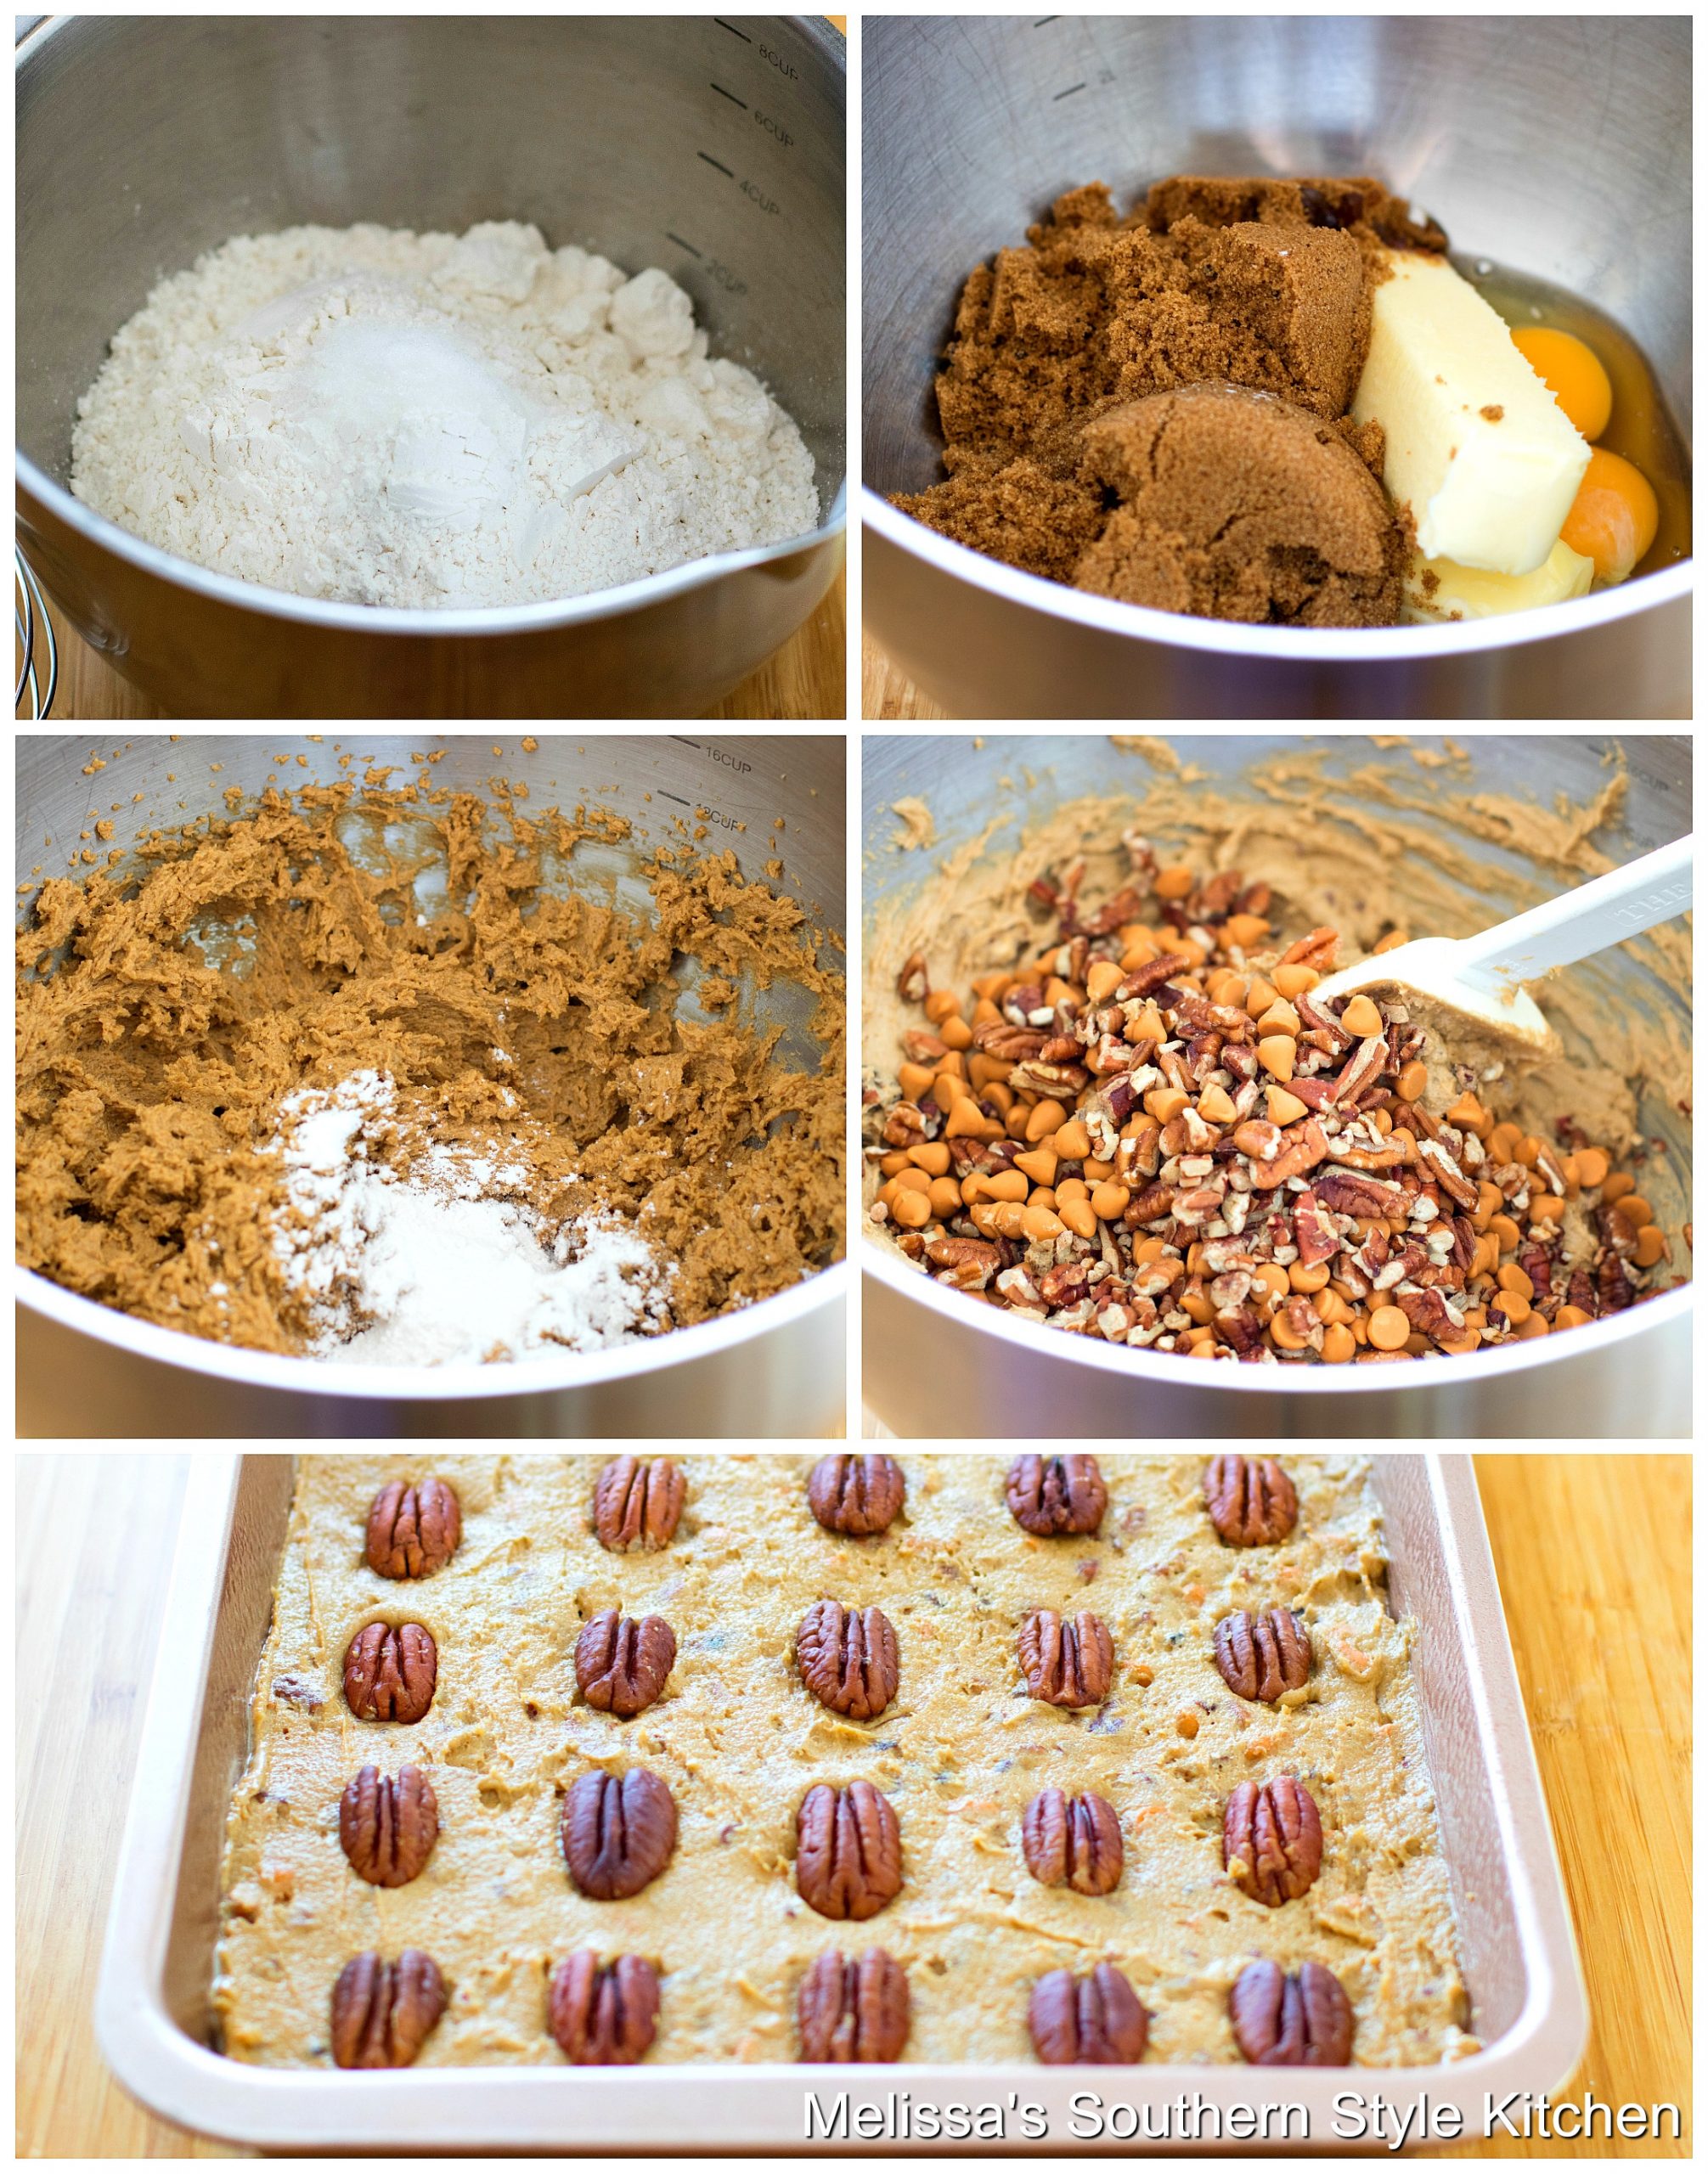 Step-by-step preparation images and ingredients for pecan bars